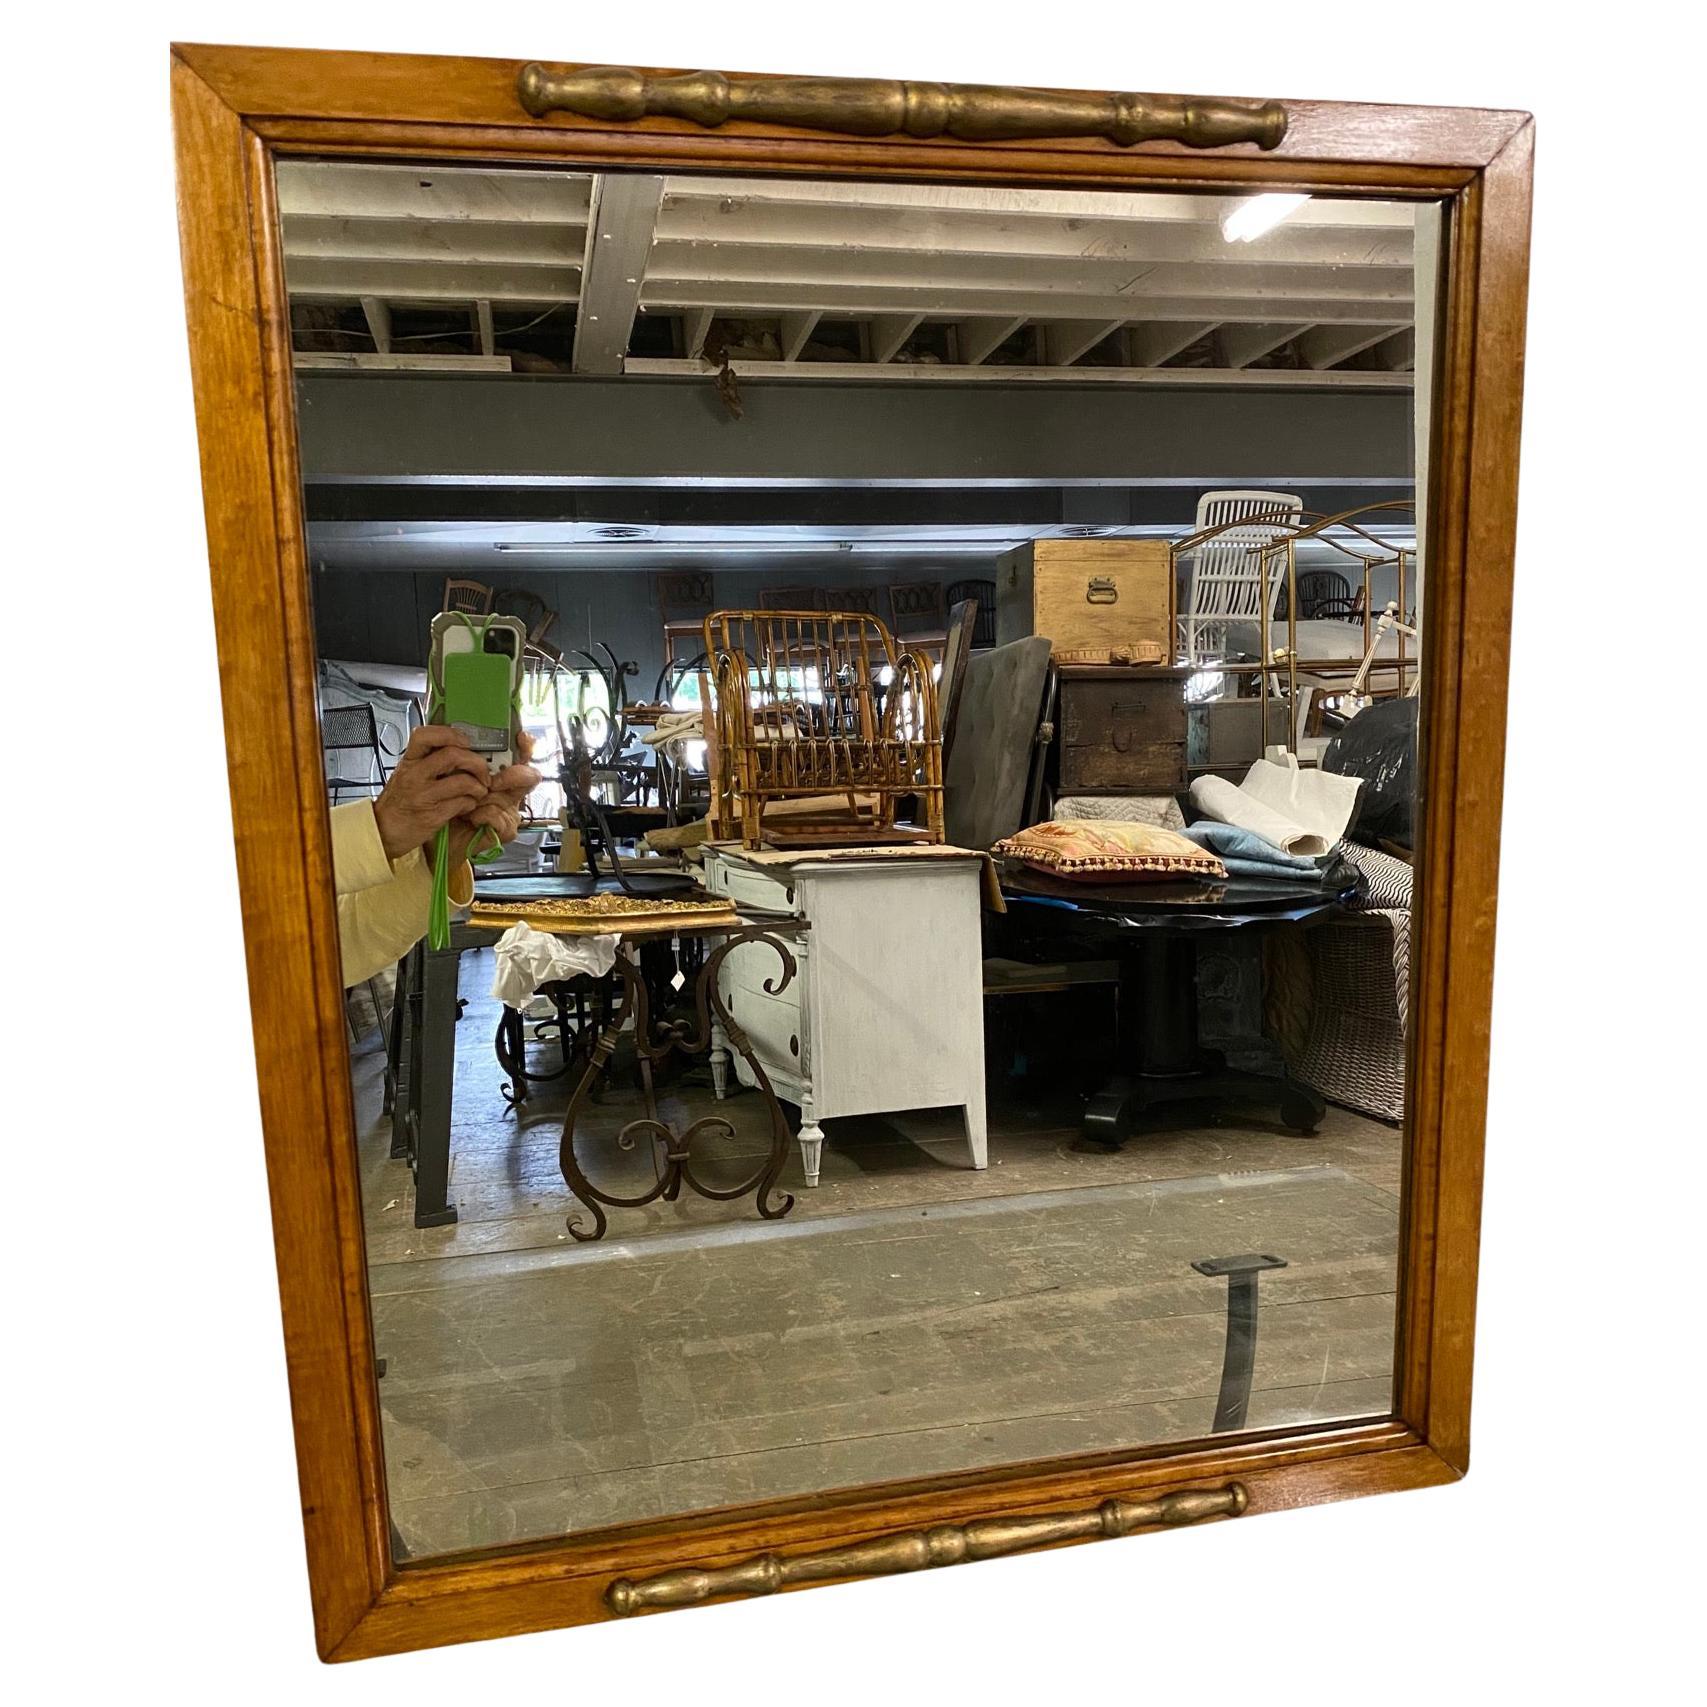 A classical style mirror that can be hung horizontally or vertically.  A vintage mirror with clean lines and just a bit of decoration that will enhance any room.  Use it as a mantel, fireplace mirror, dresser mirror or powder room mirror.
Classical,